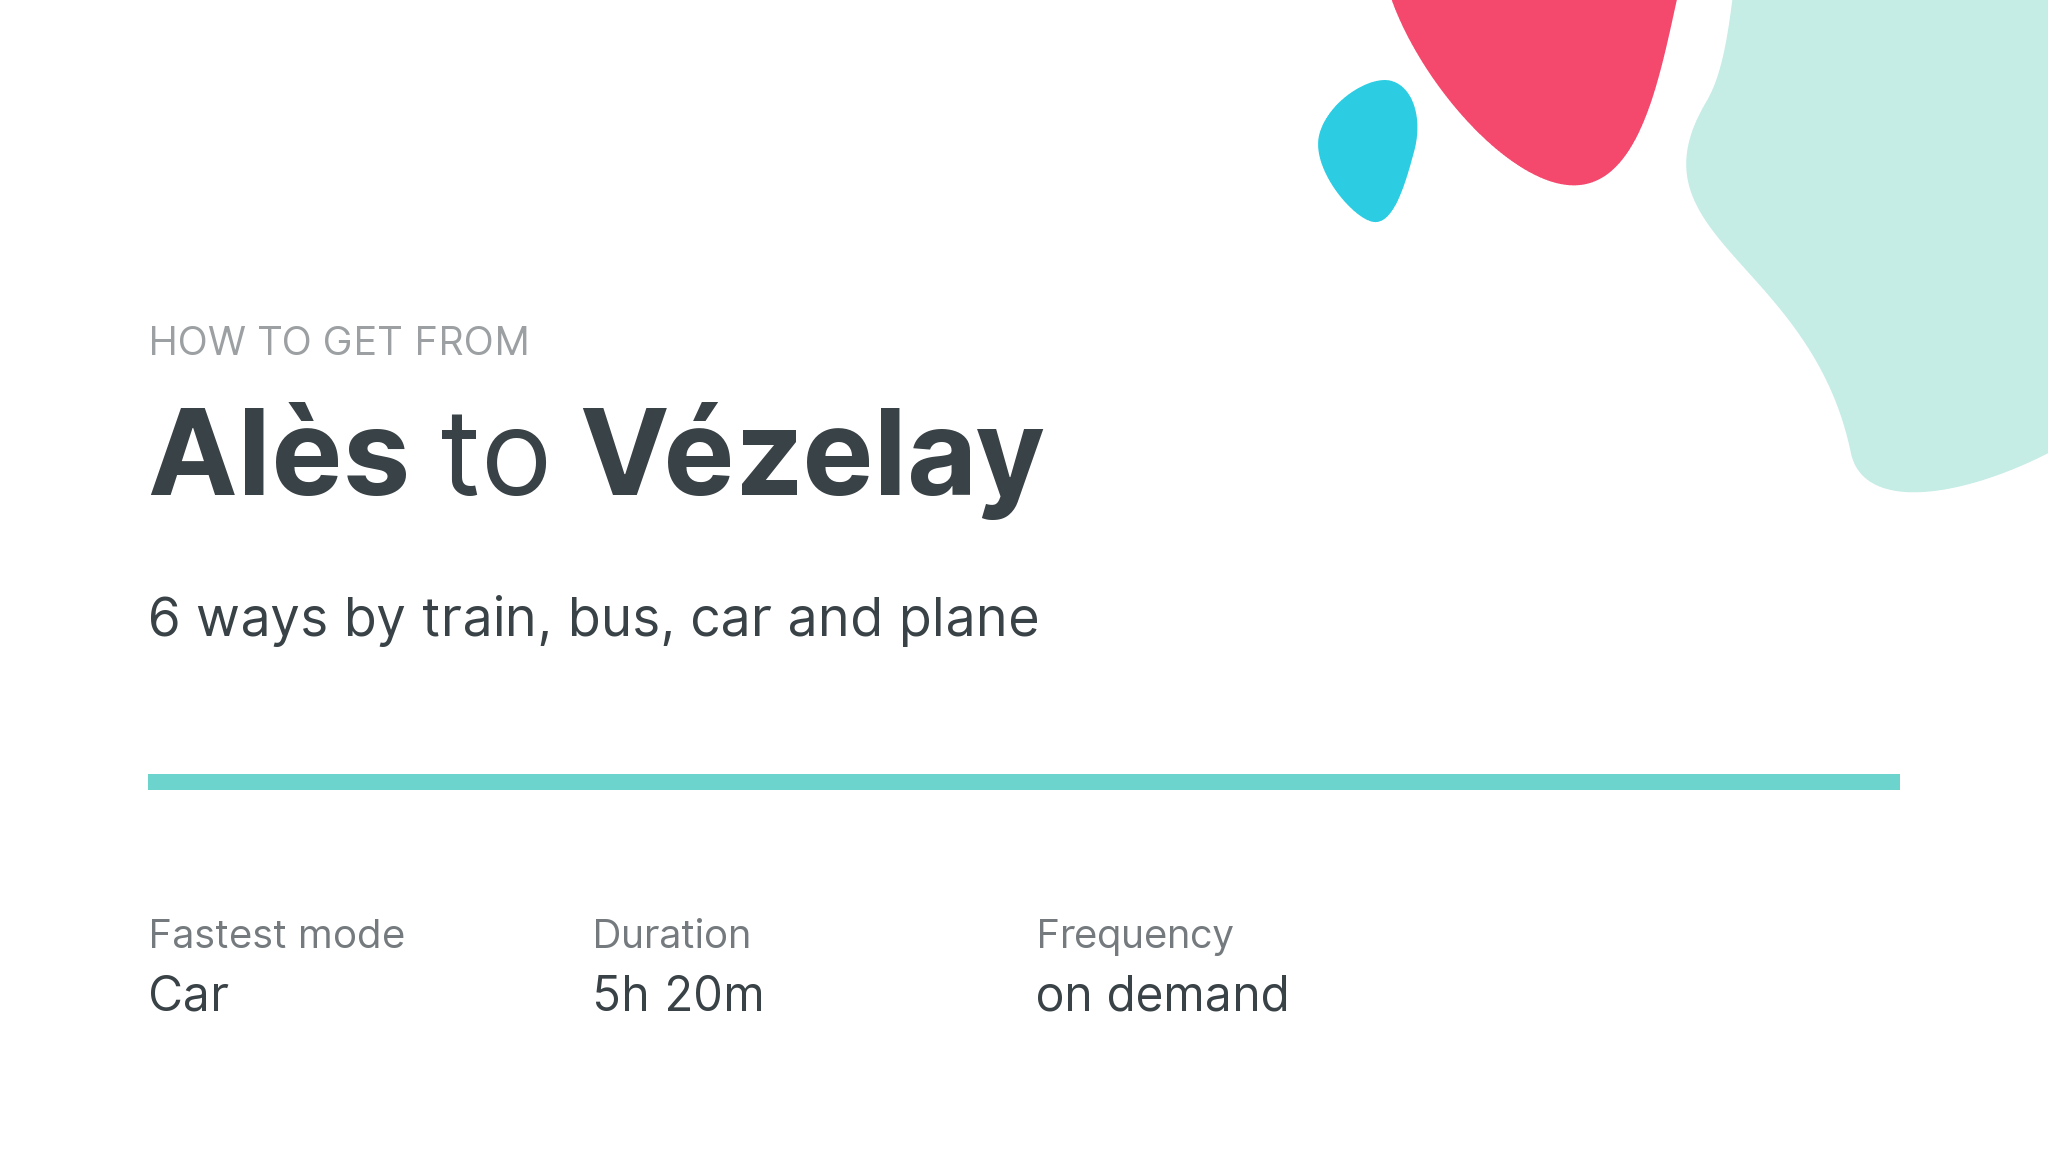 How do I get from Alès to Vézelay